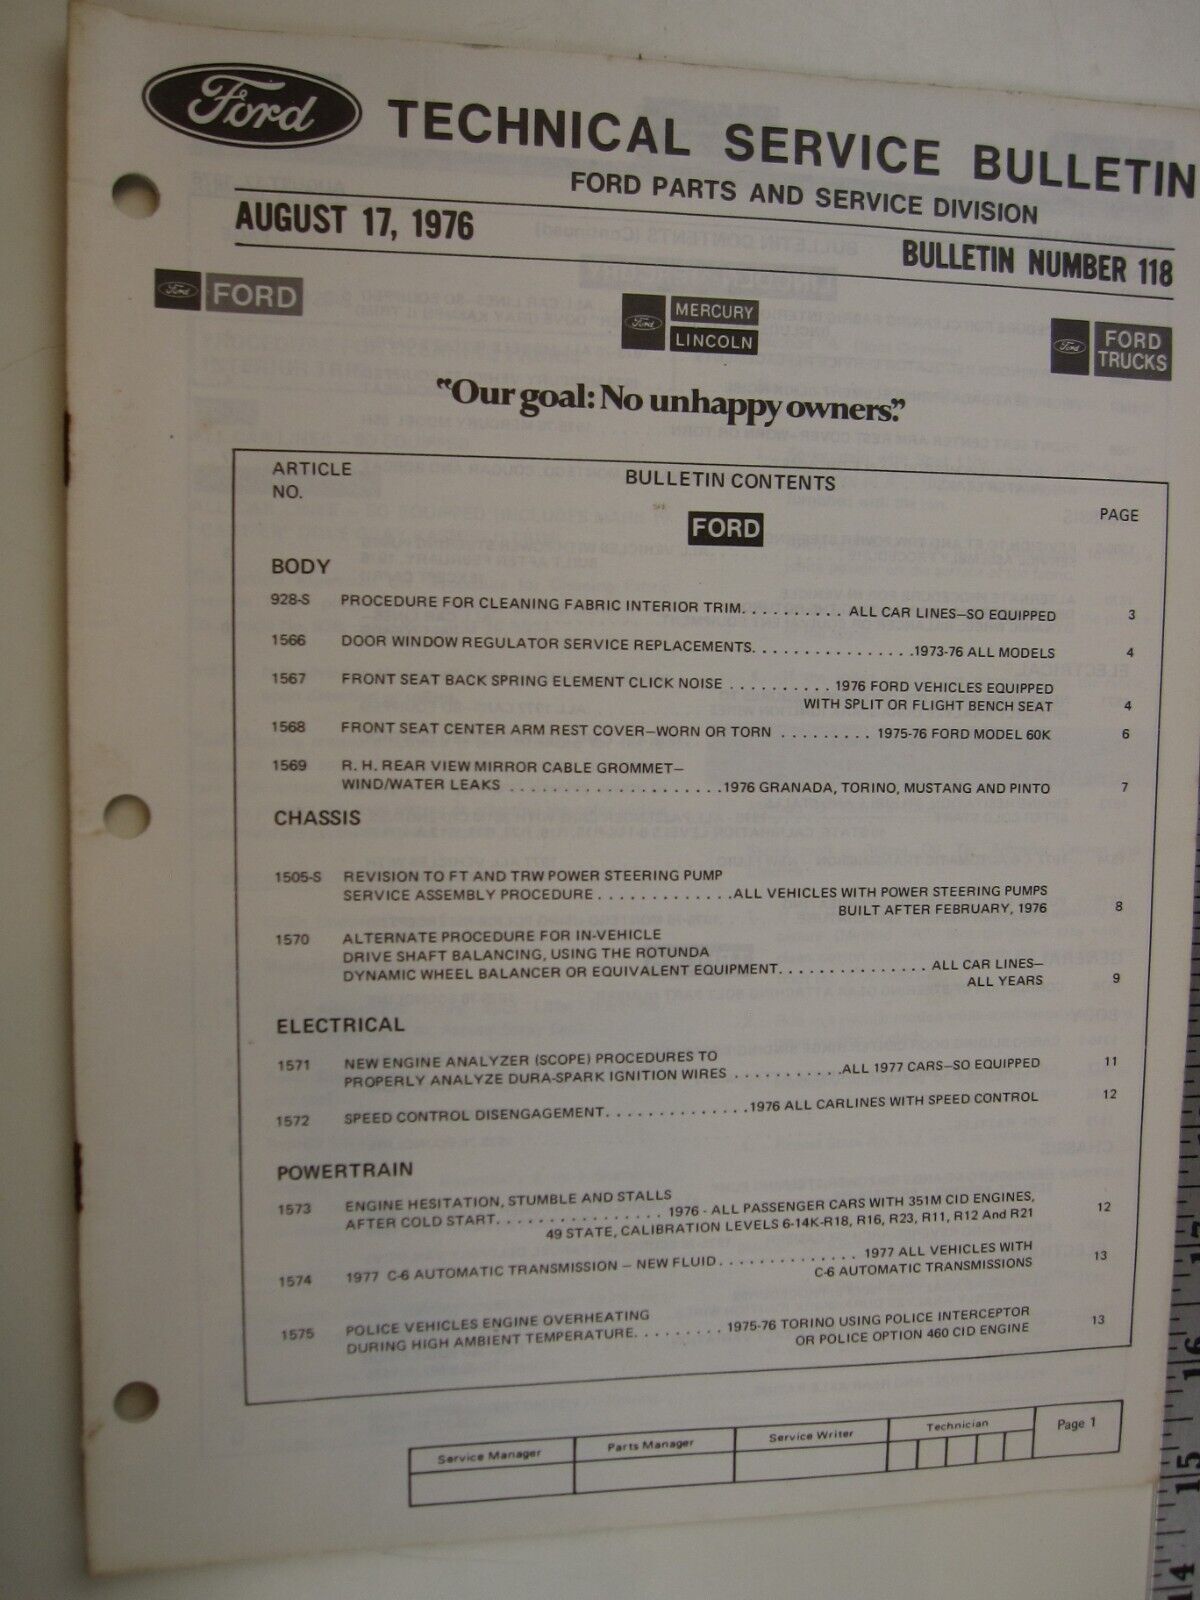 August 17, 1976 FORD Technical Service Bulletin Number 118  BIS